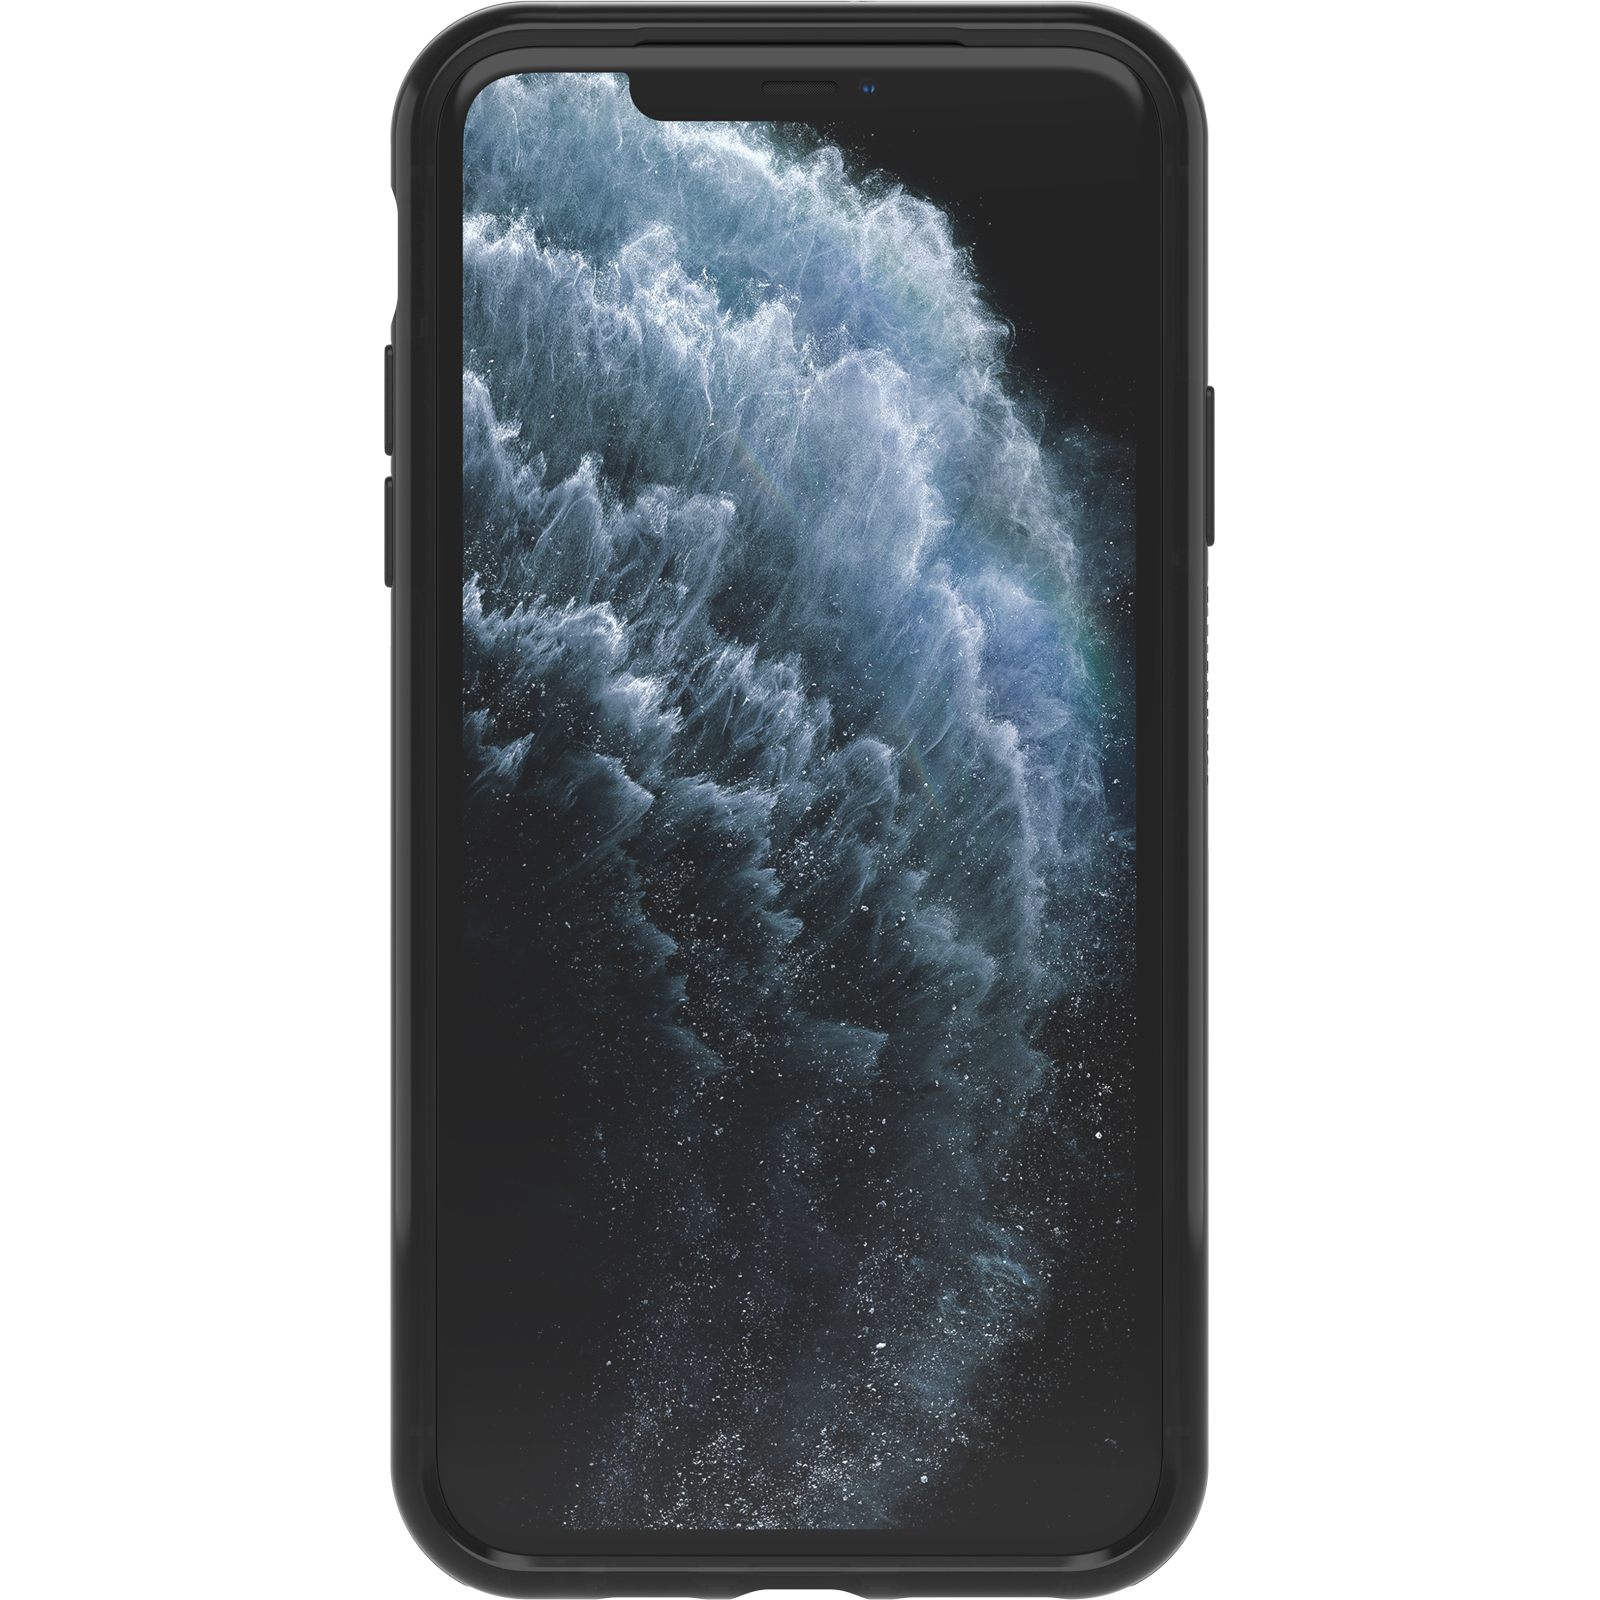 https://www.otterbox.com/on/demandware.static/-/Sites-masterCatalog/default/dw2c131494/productimages/dis/cases-screen-protection/apl41-iphp19/apl41-iphp19-cowprint-2.jpg